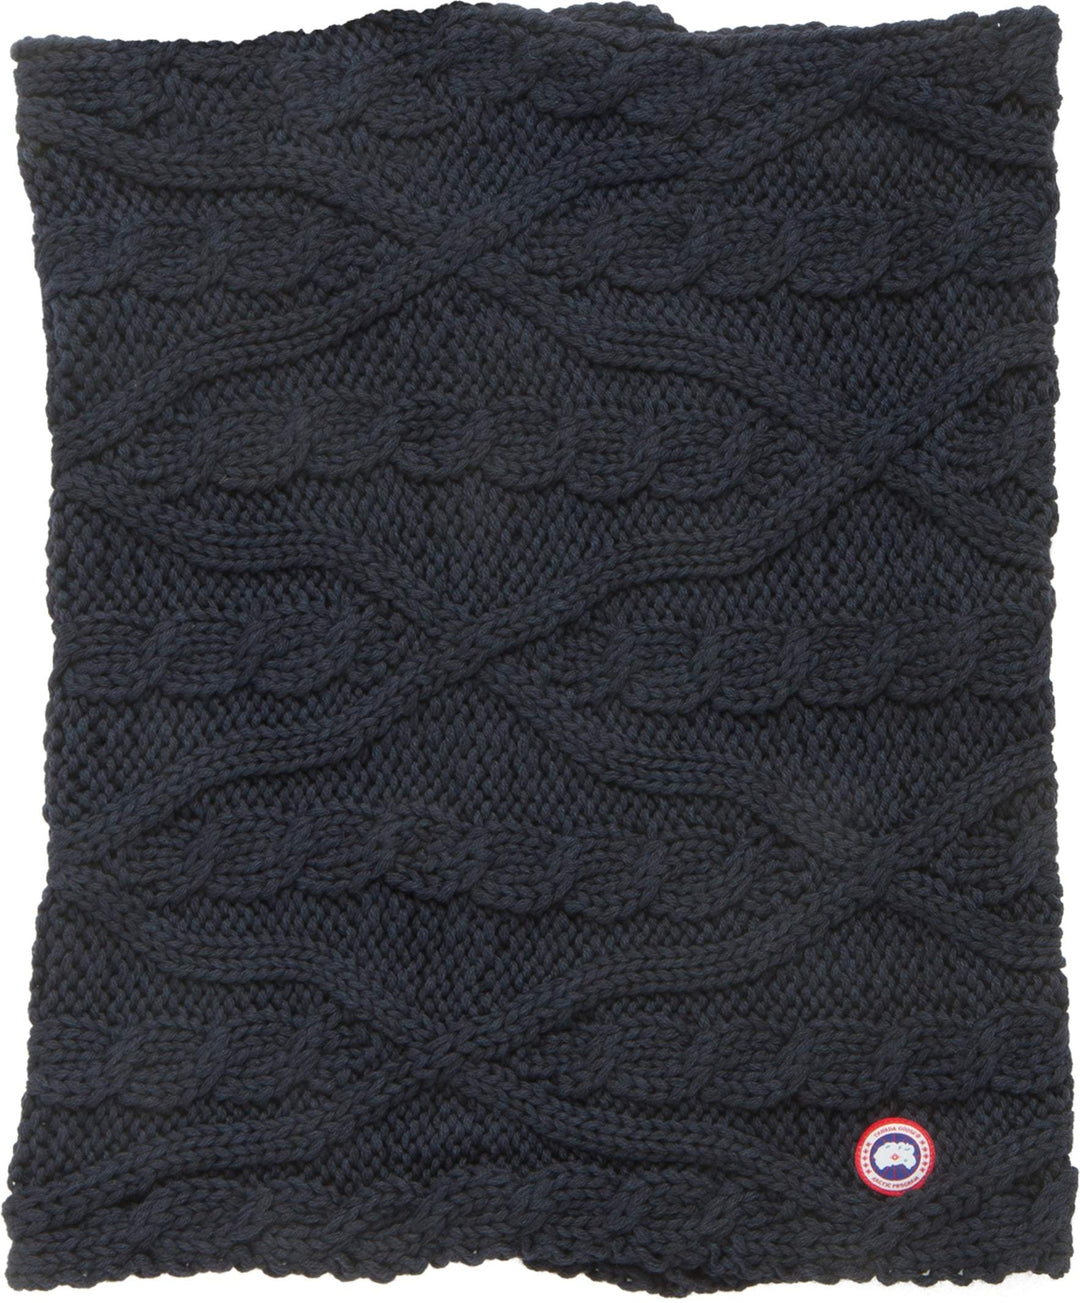 Canada Goose Merino Chunky Cable Snood